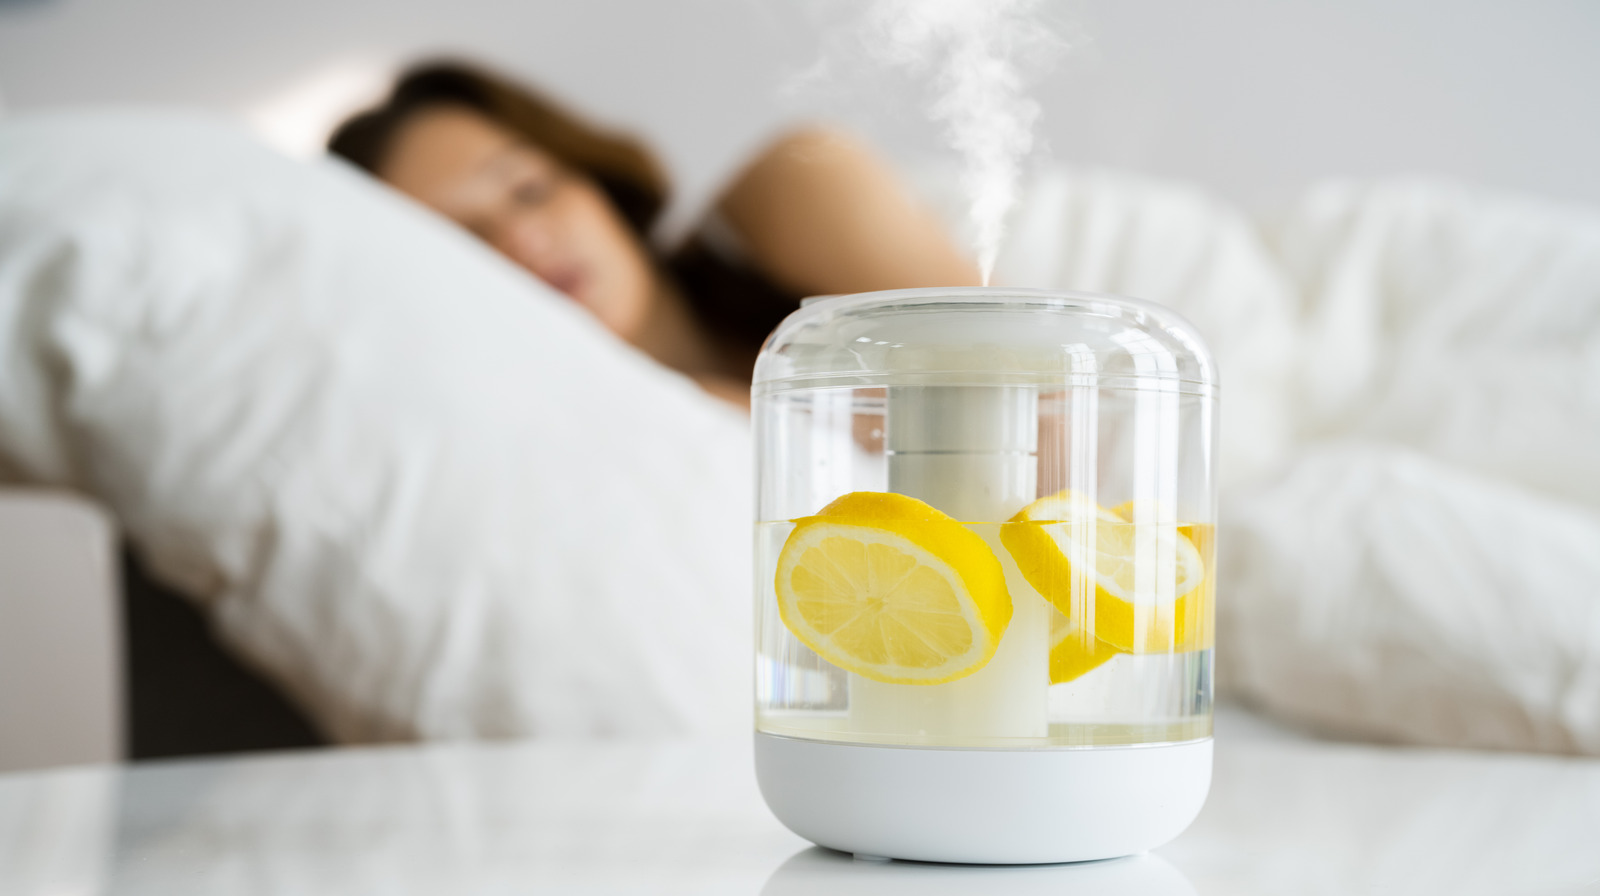 Can A Lemon Lower Your Blood Pressure While You Sleep? Here’s What We Know – Health Digest